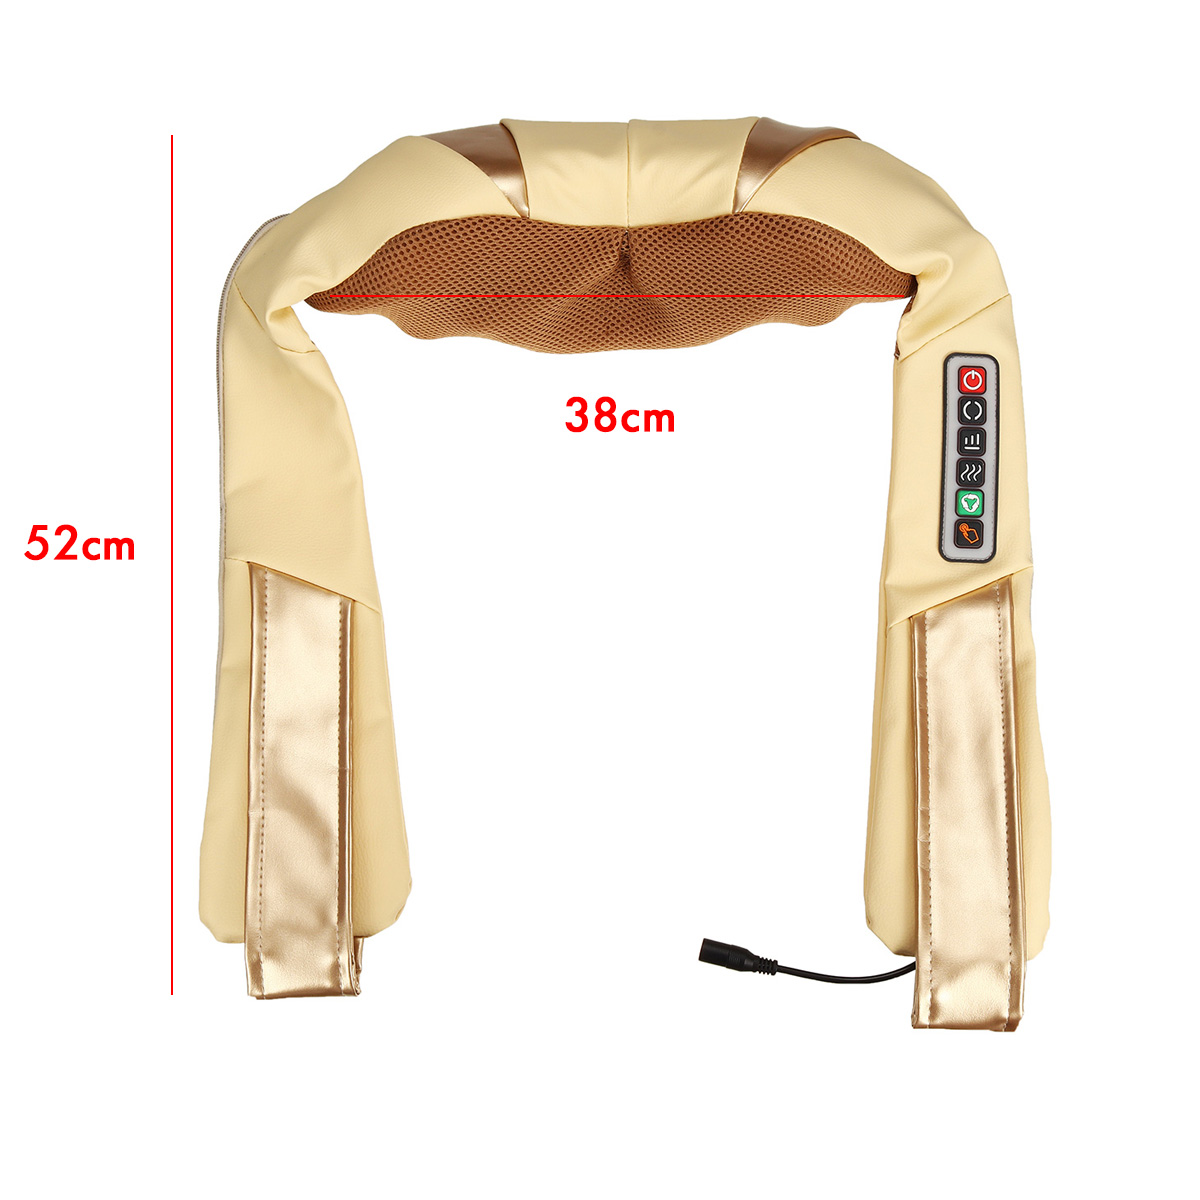 100-220V-Electric-Massager-Infrared-Heating-Neck-Cervical-Shoulder-Pain-Relief-Therapy-Device-1677048-12